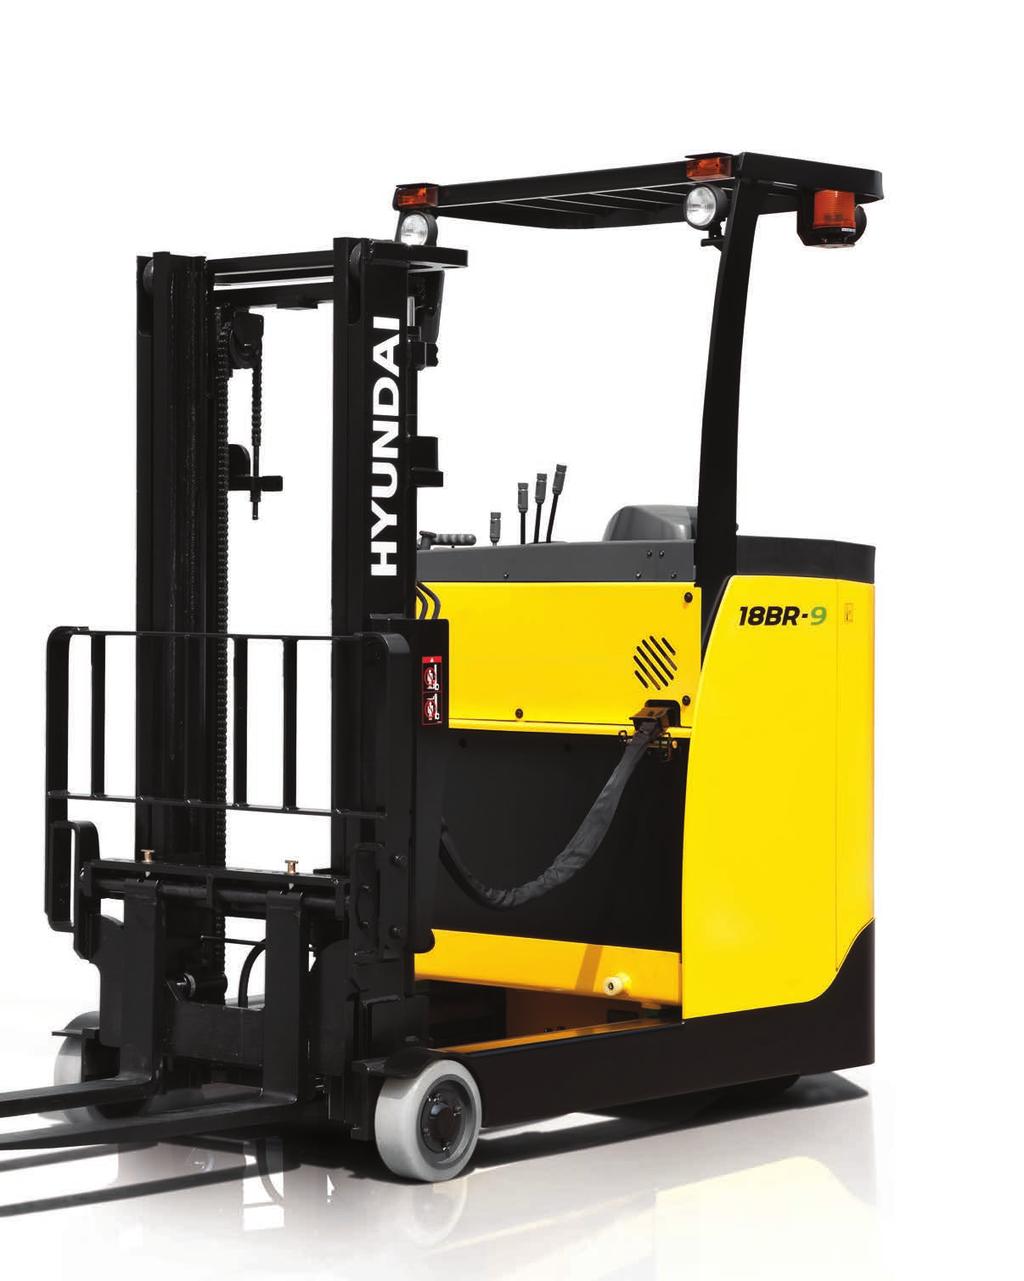 Compact forklift with proven AC technology Maximum performance Comfortable operating